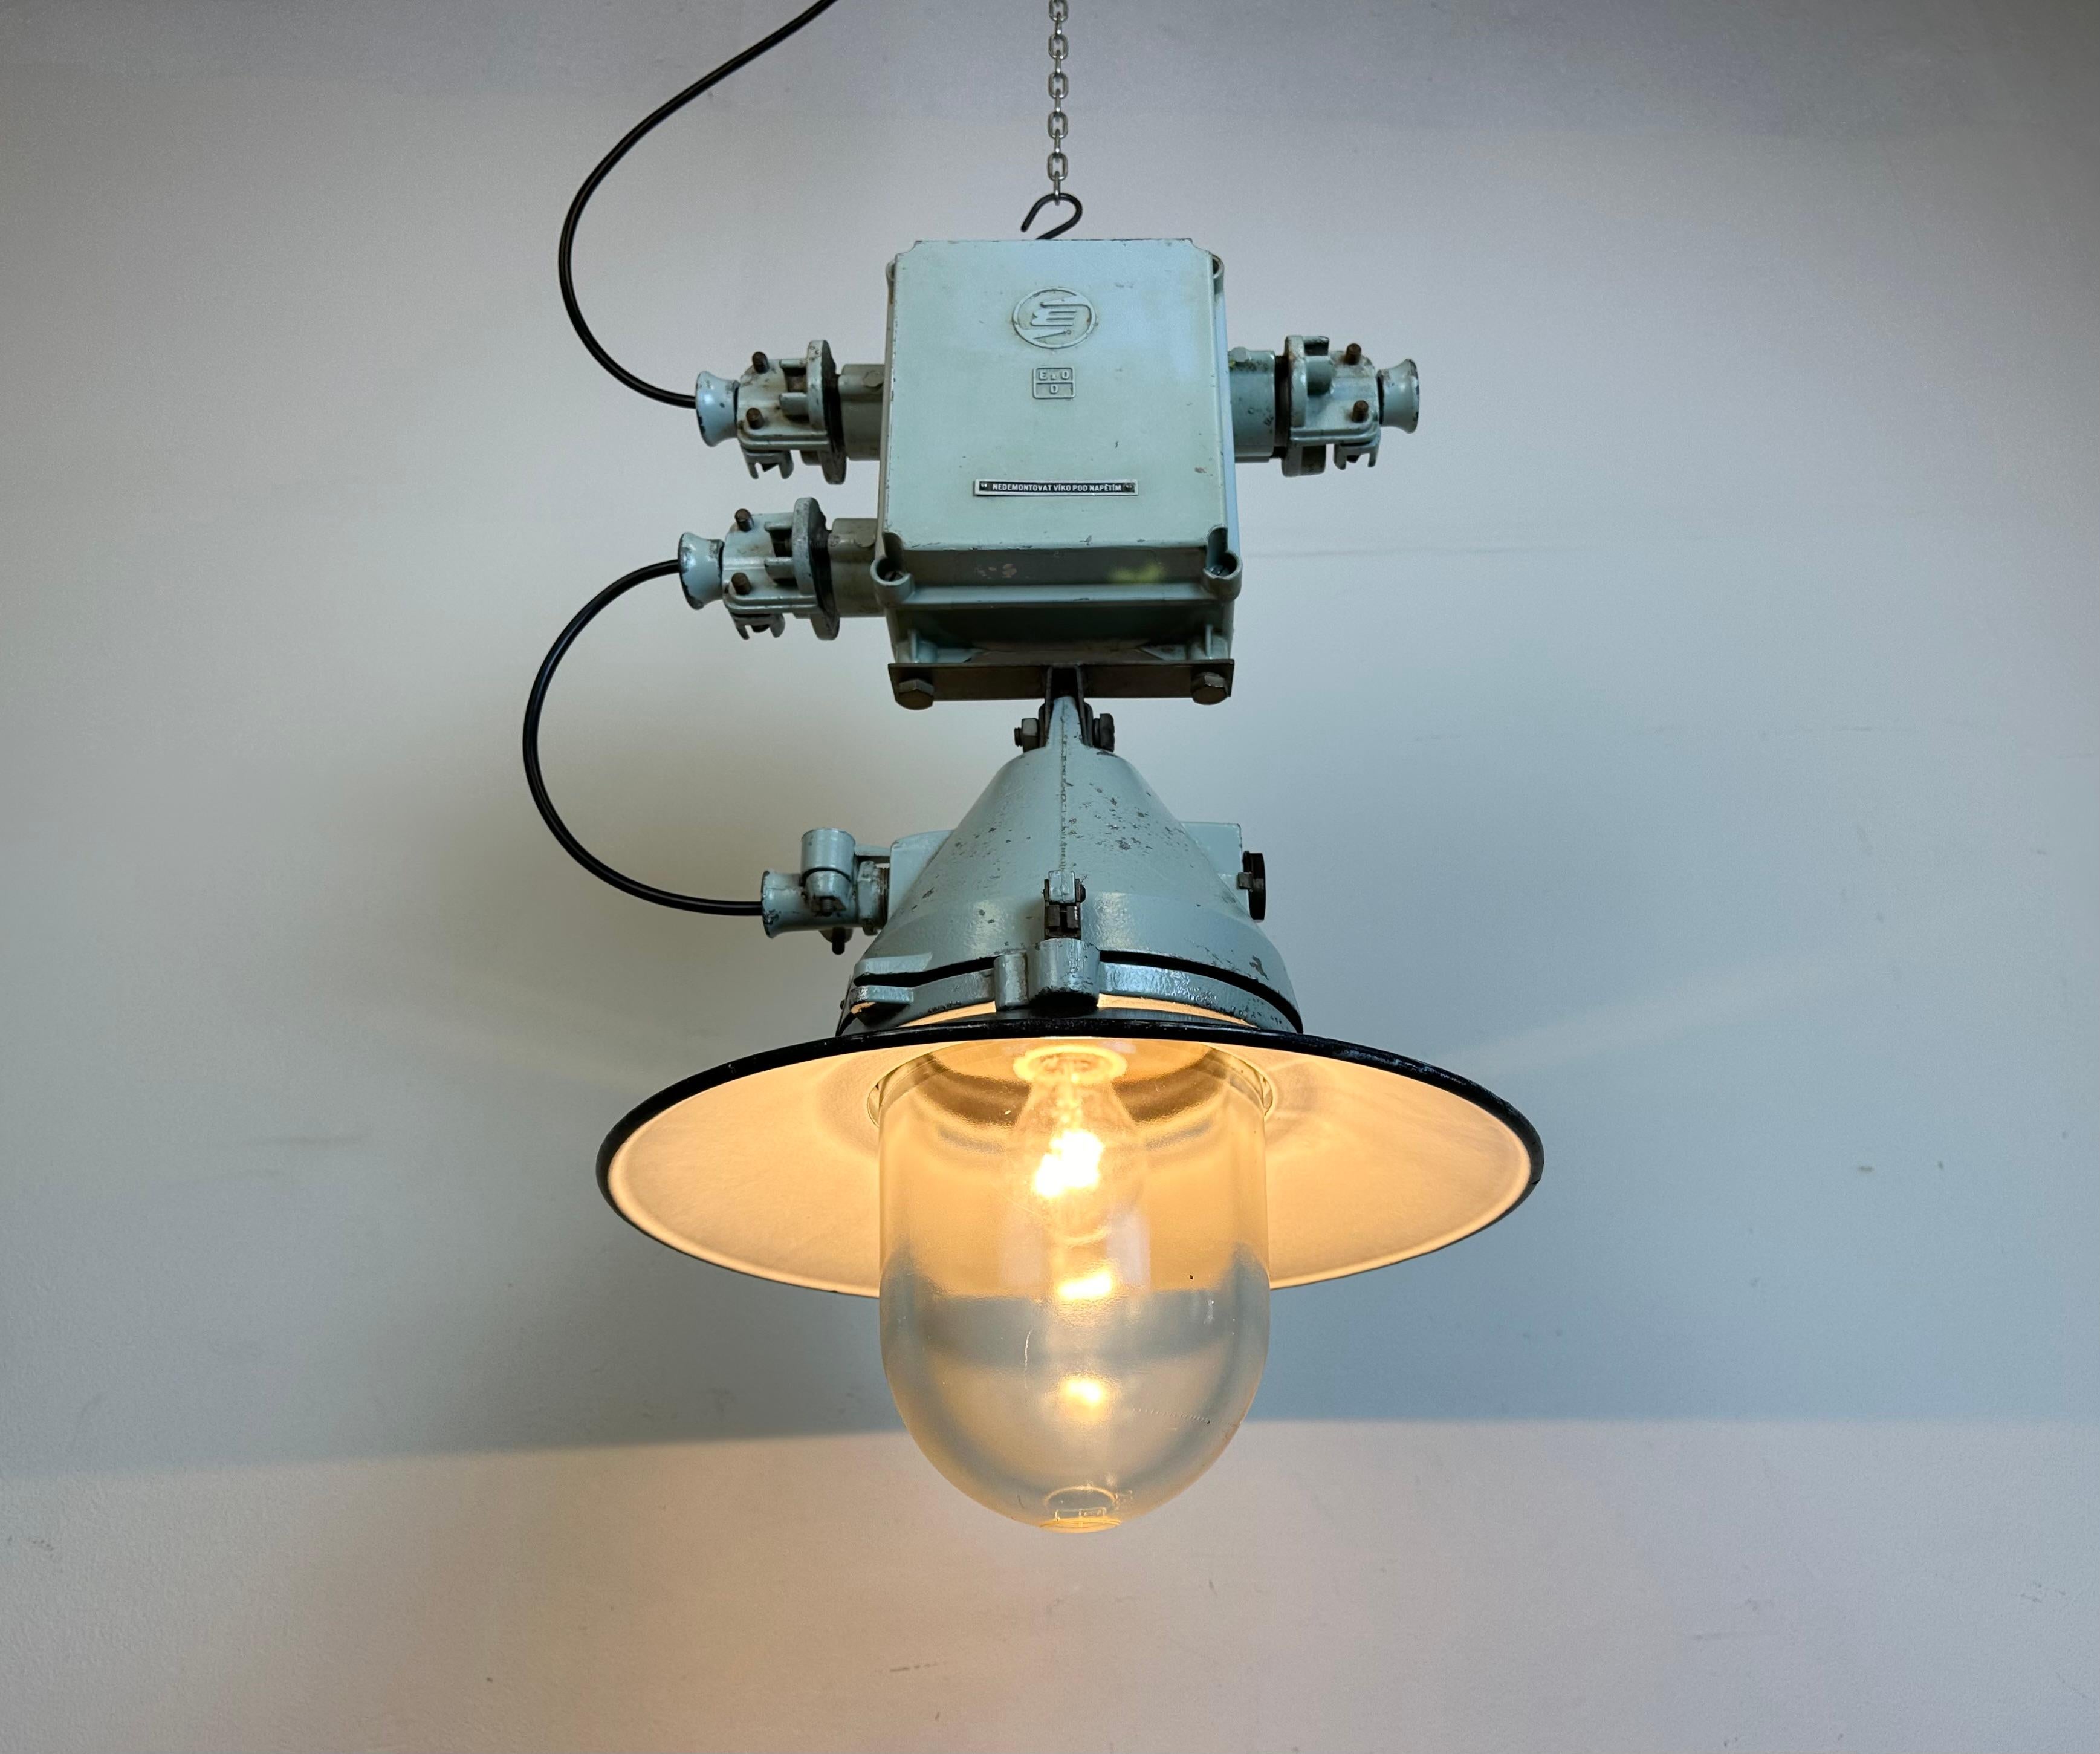 Grey Cast Aluminium Explosion Proof Lamp with Enameled Shade, 1970s For Sale 9